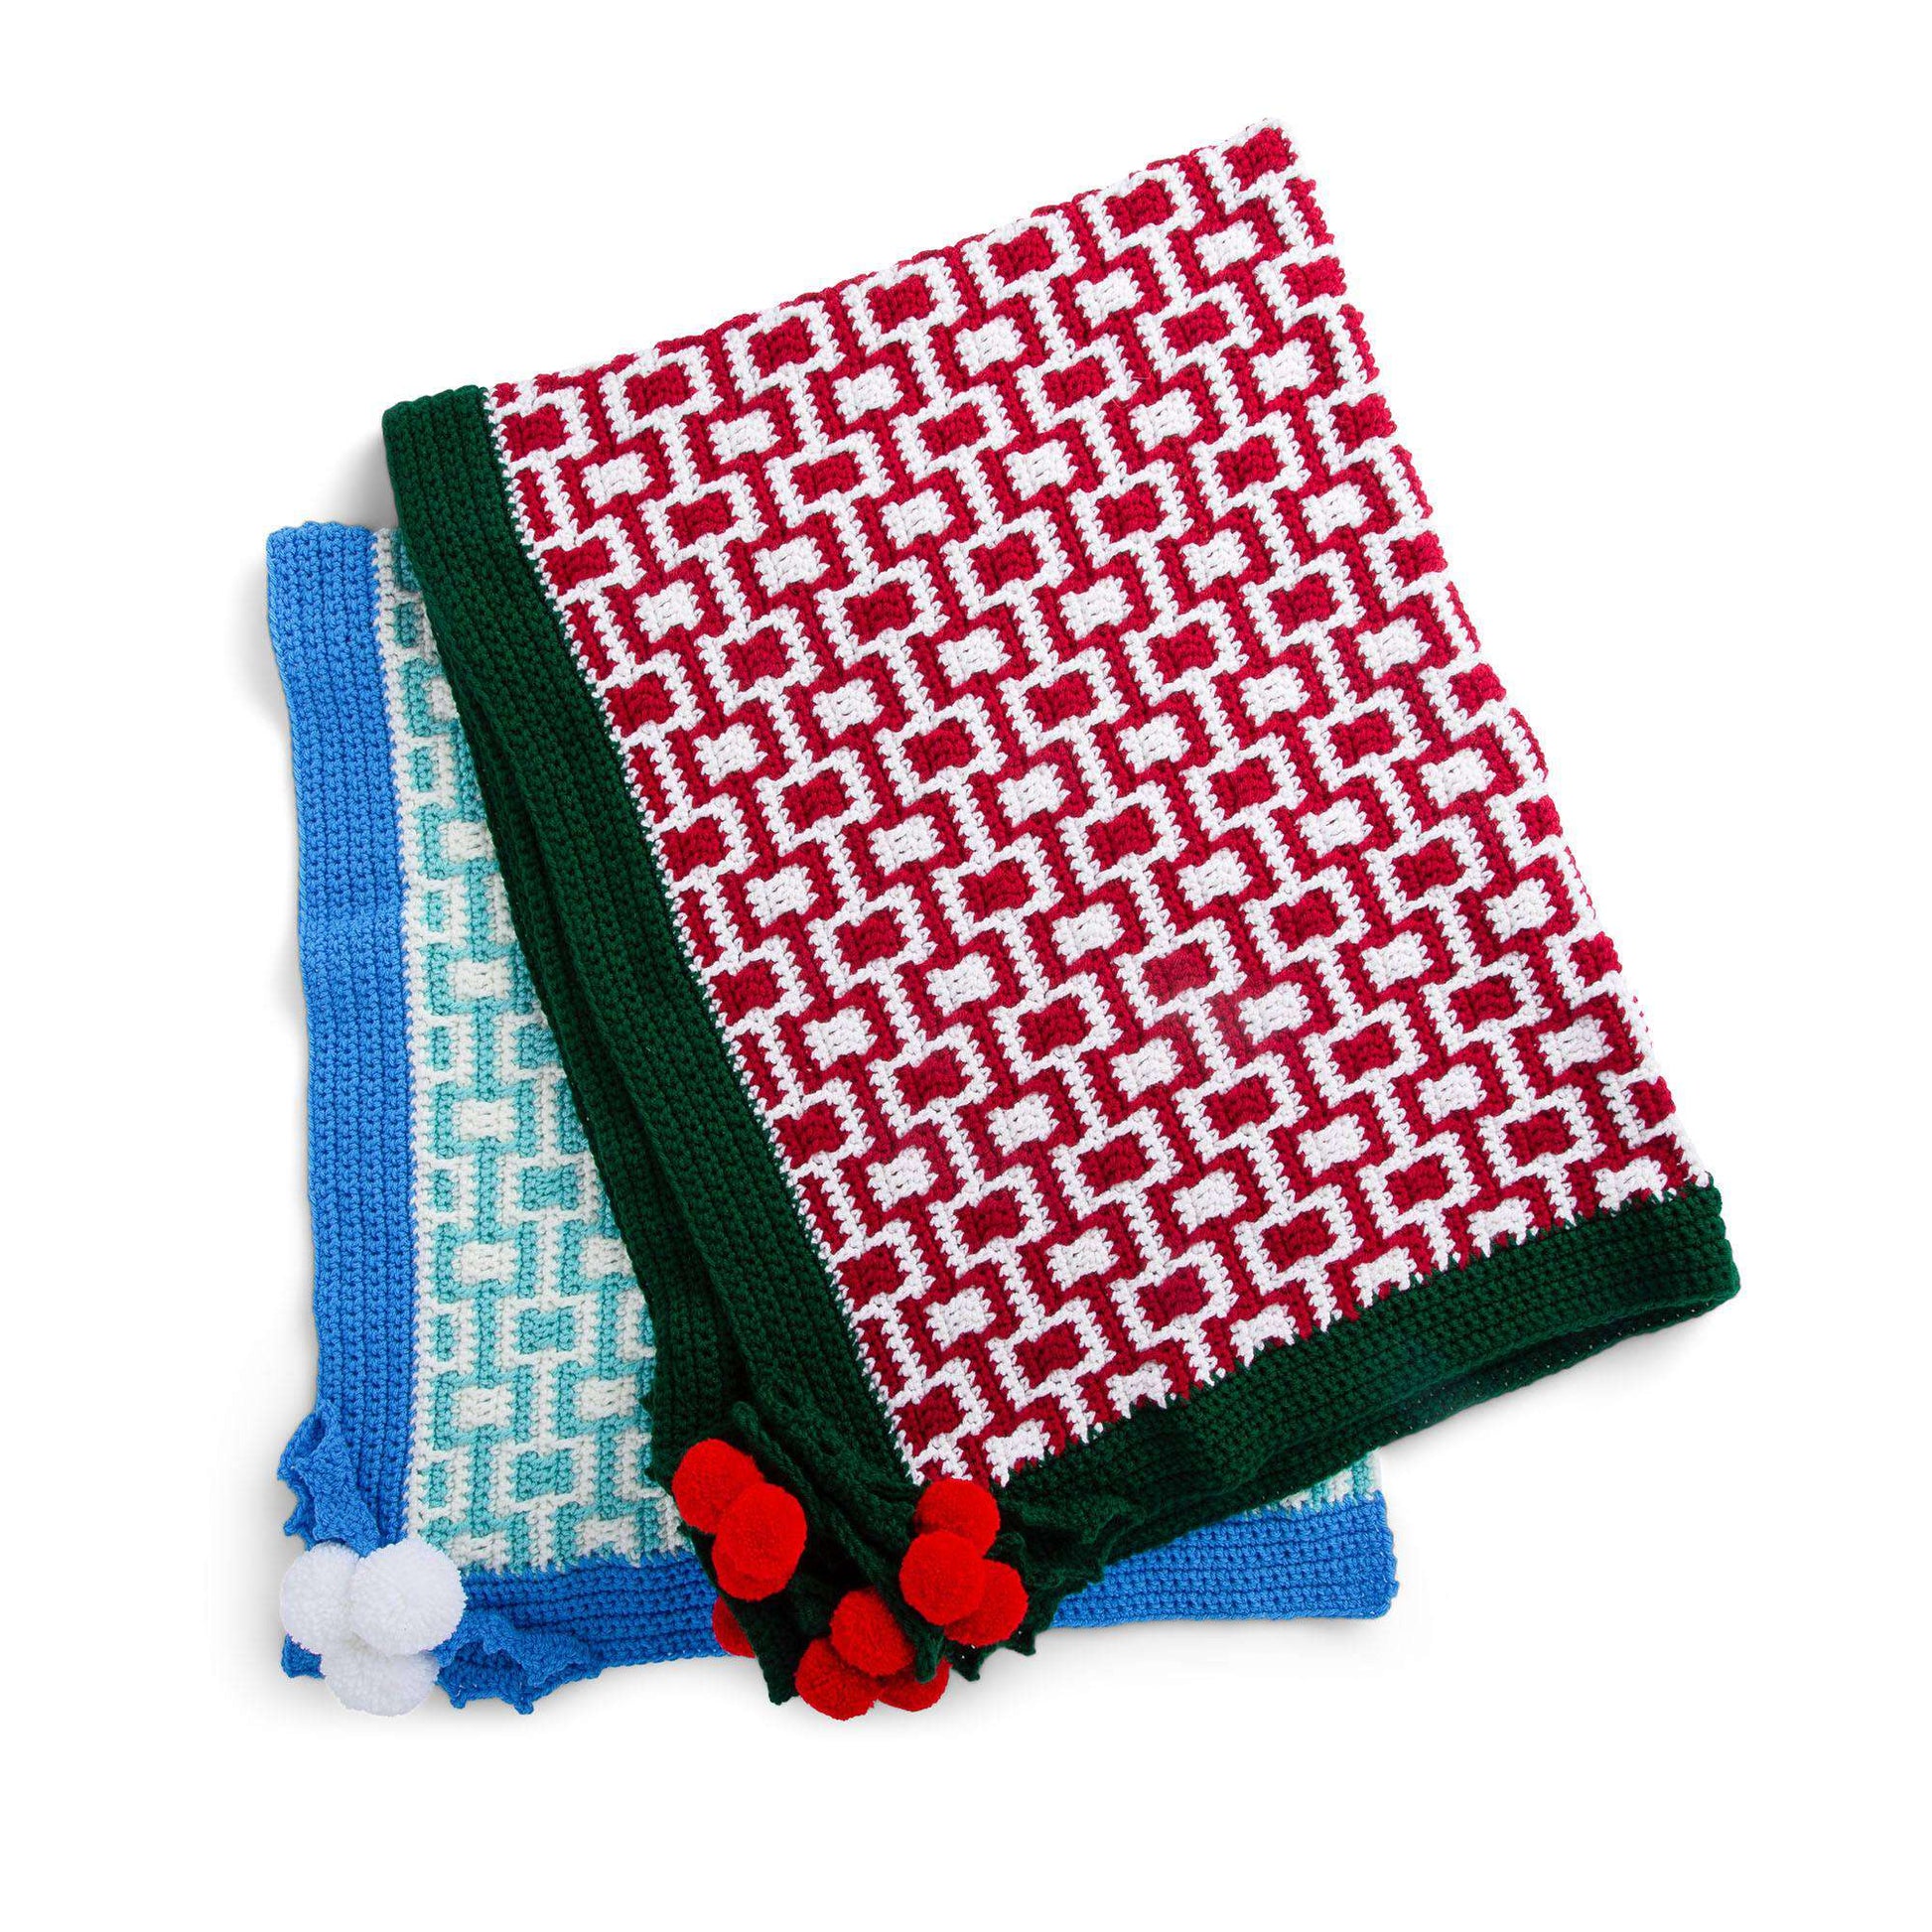 Free Red Heart Holly Jolly Mosaic Crochet Holiday Blanket Pattern